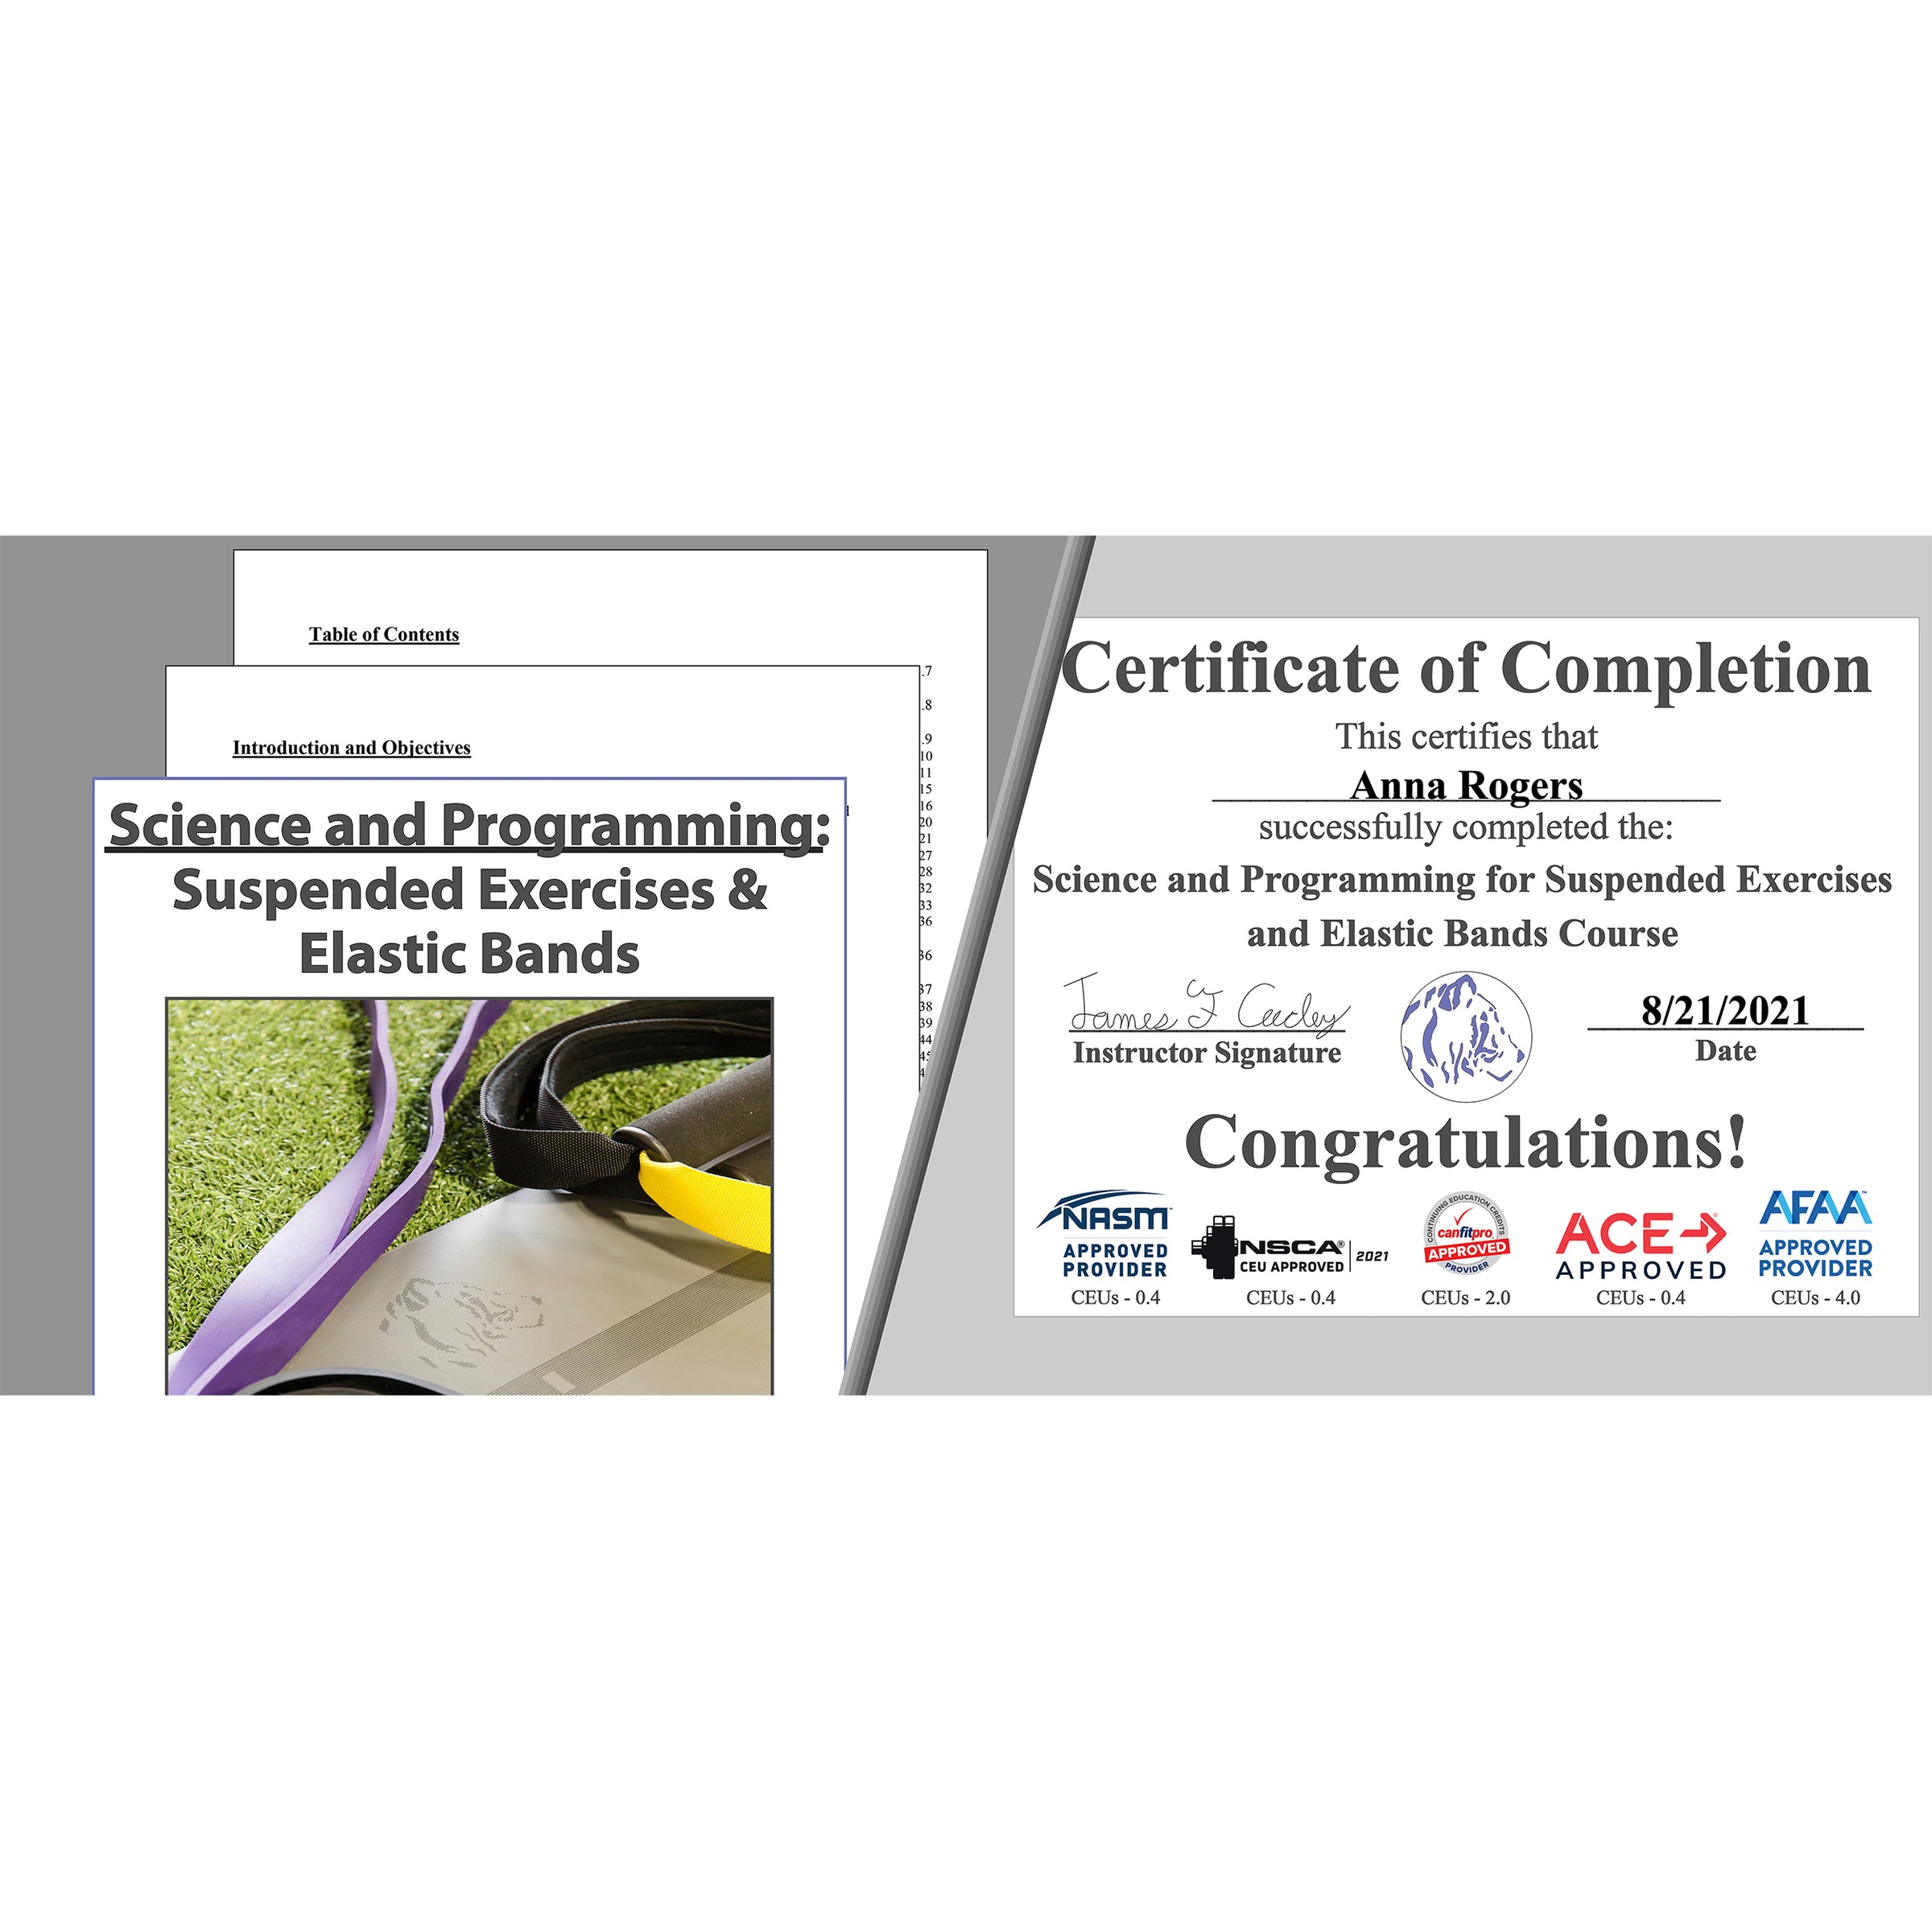 Online. CEU, CEC. Approved by NSCA, NASM, AFAA, ACE Fitness, and CanFitPro. CSCS, personal trainer, suspension exercises elastic bands Course, class, not trx training